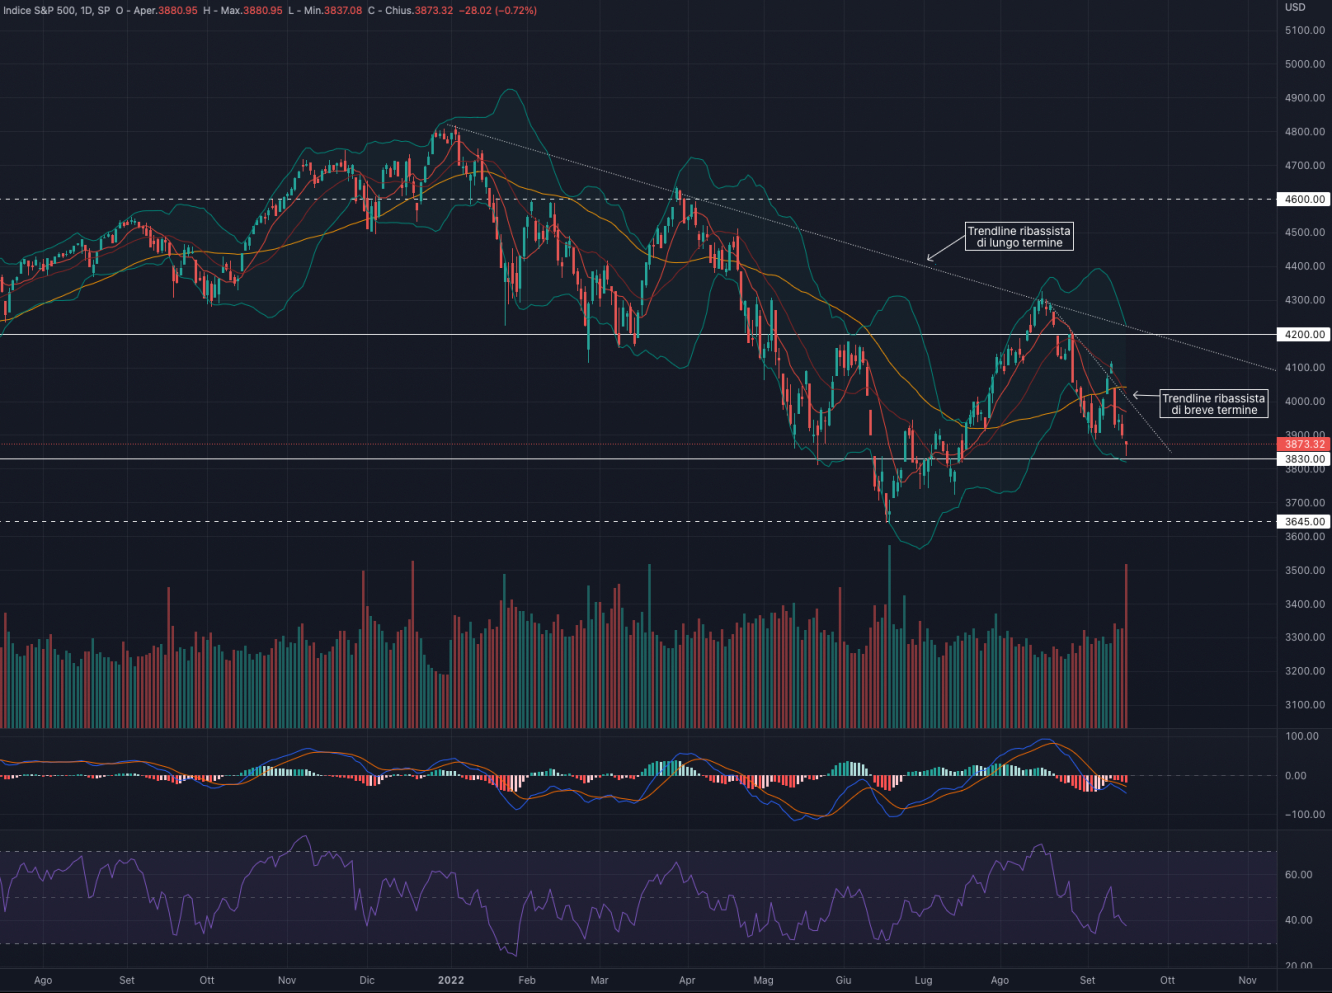 Daily chart: SPX